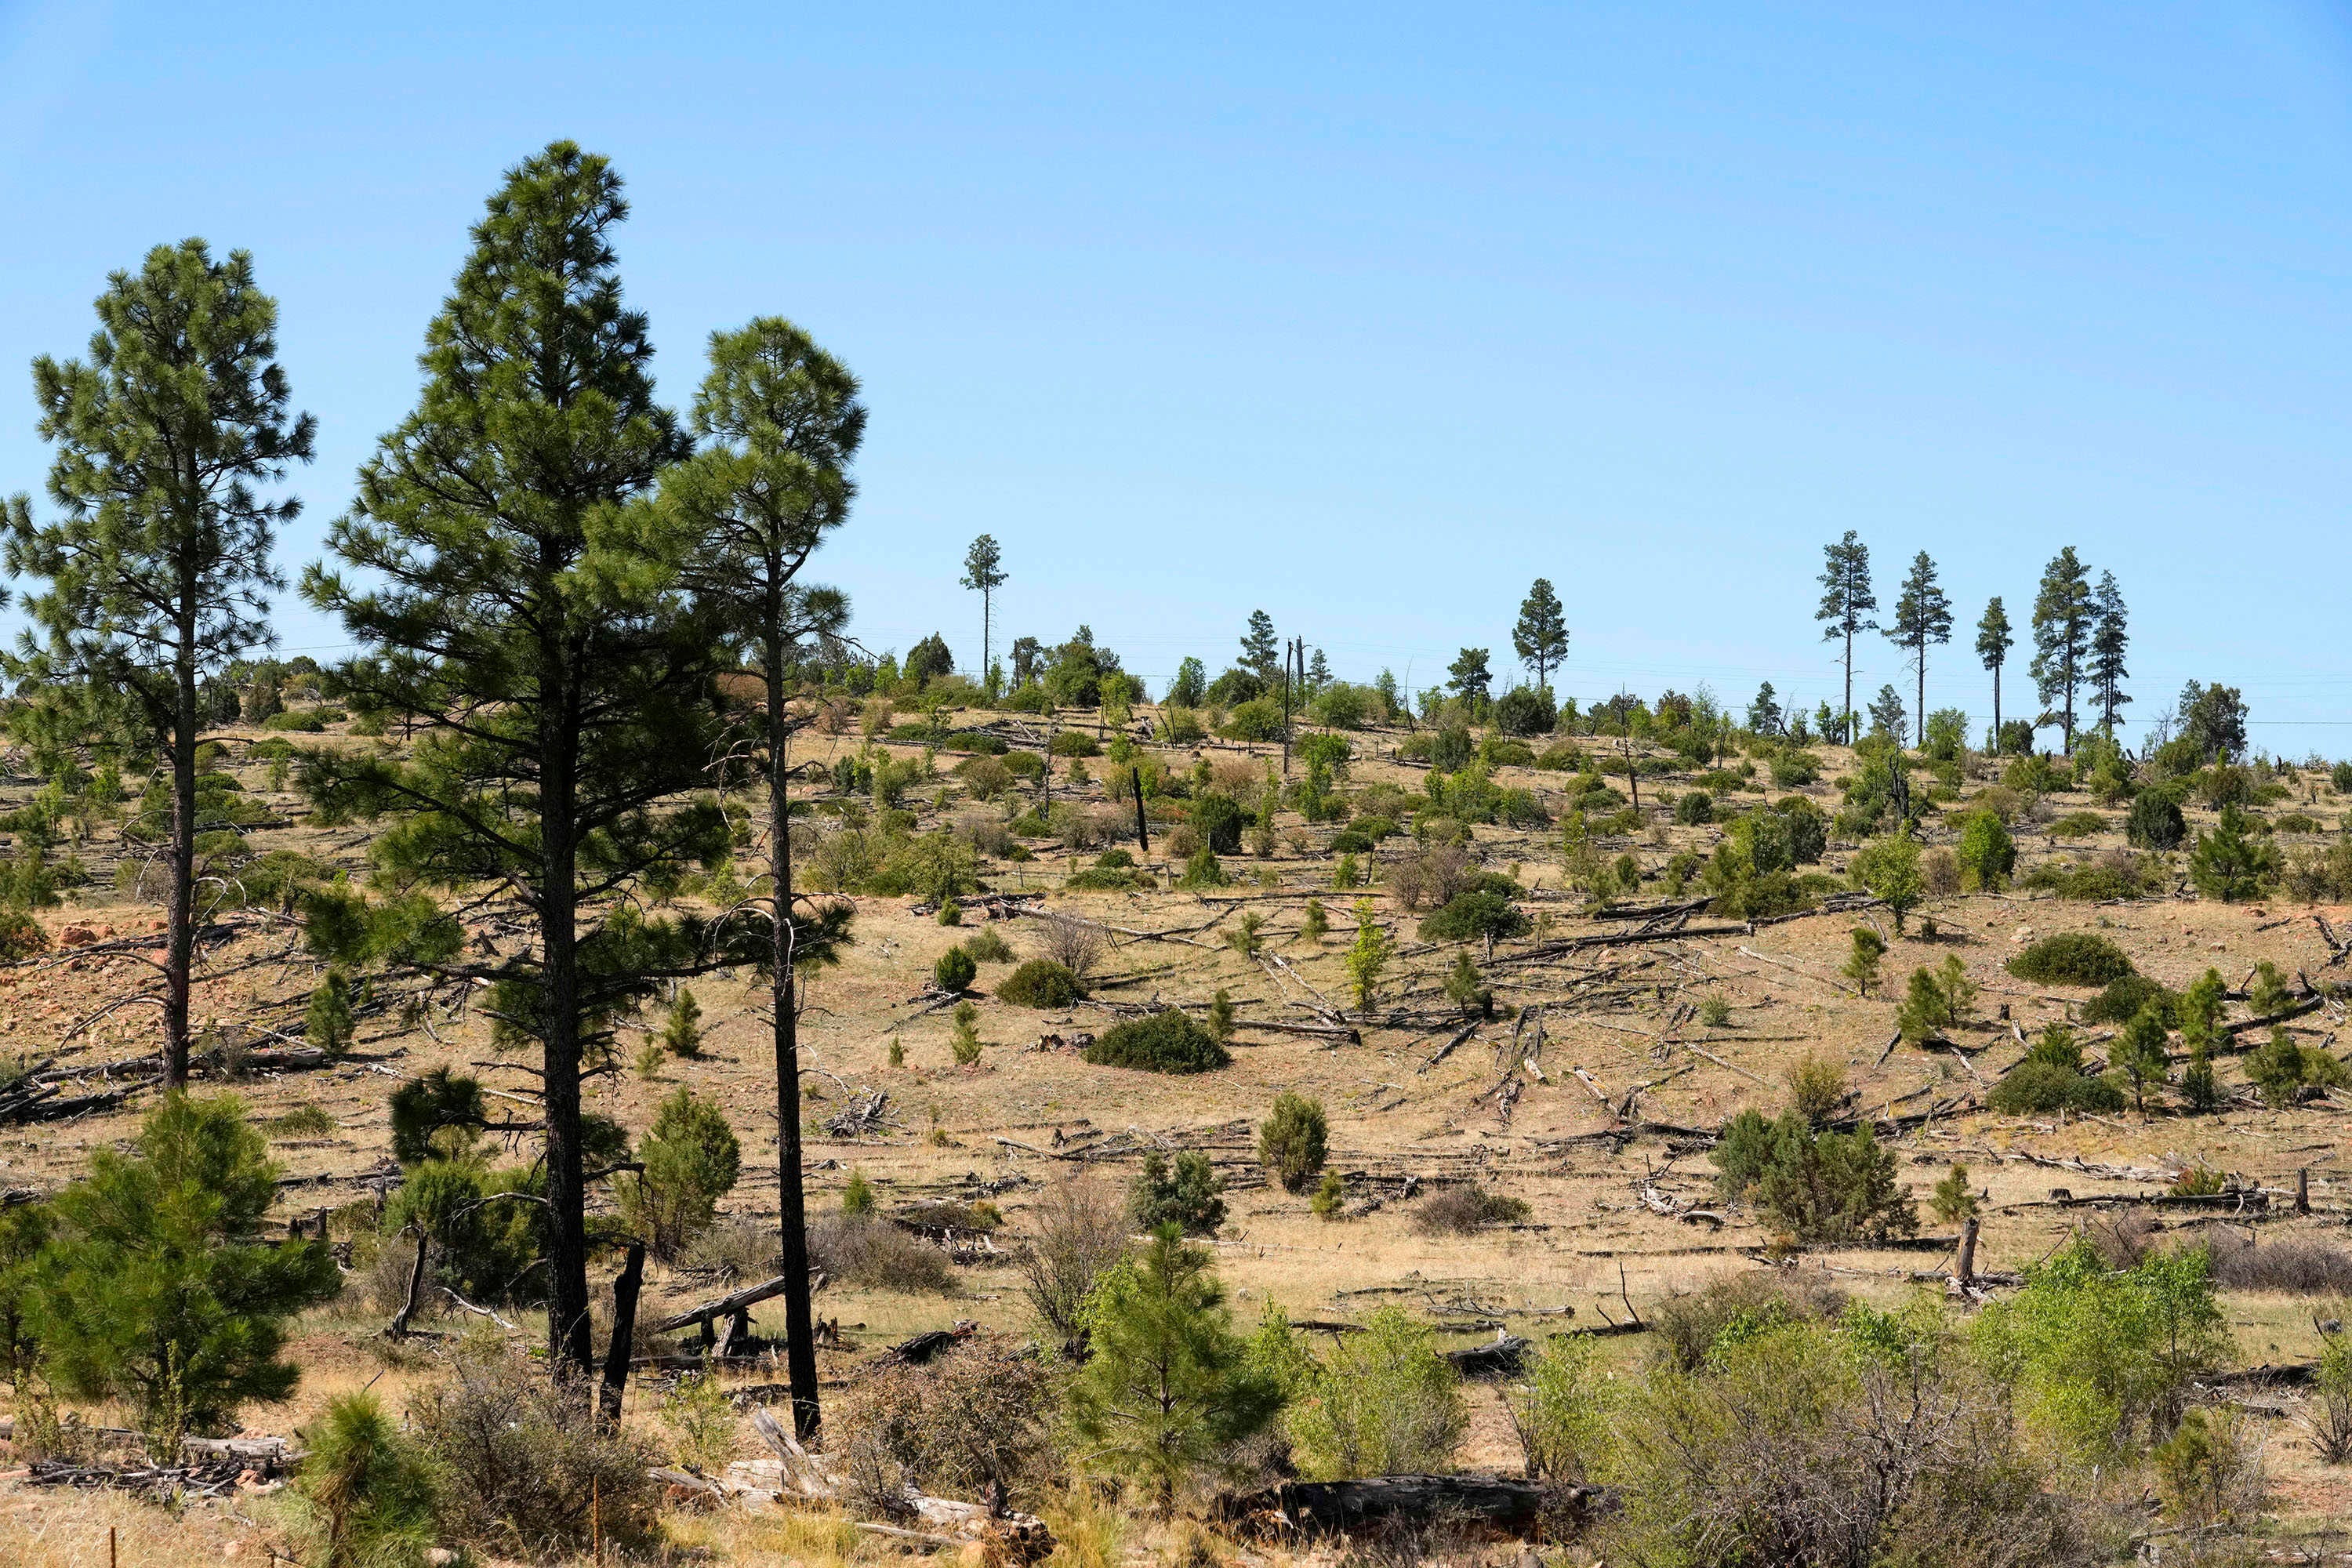 A burn scar 20 years after the Rodeo-Chediski Fire destroyed this Ponderosa pine forest near Pinedale.